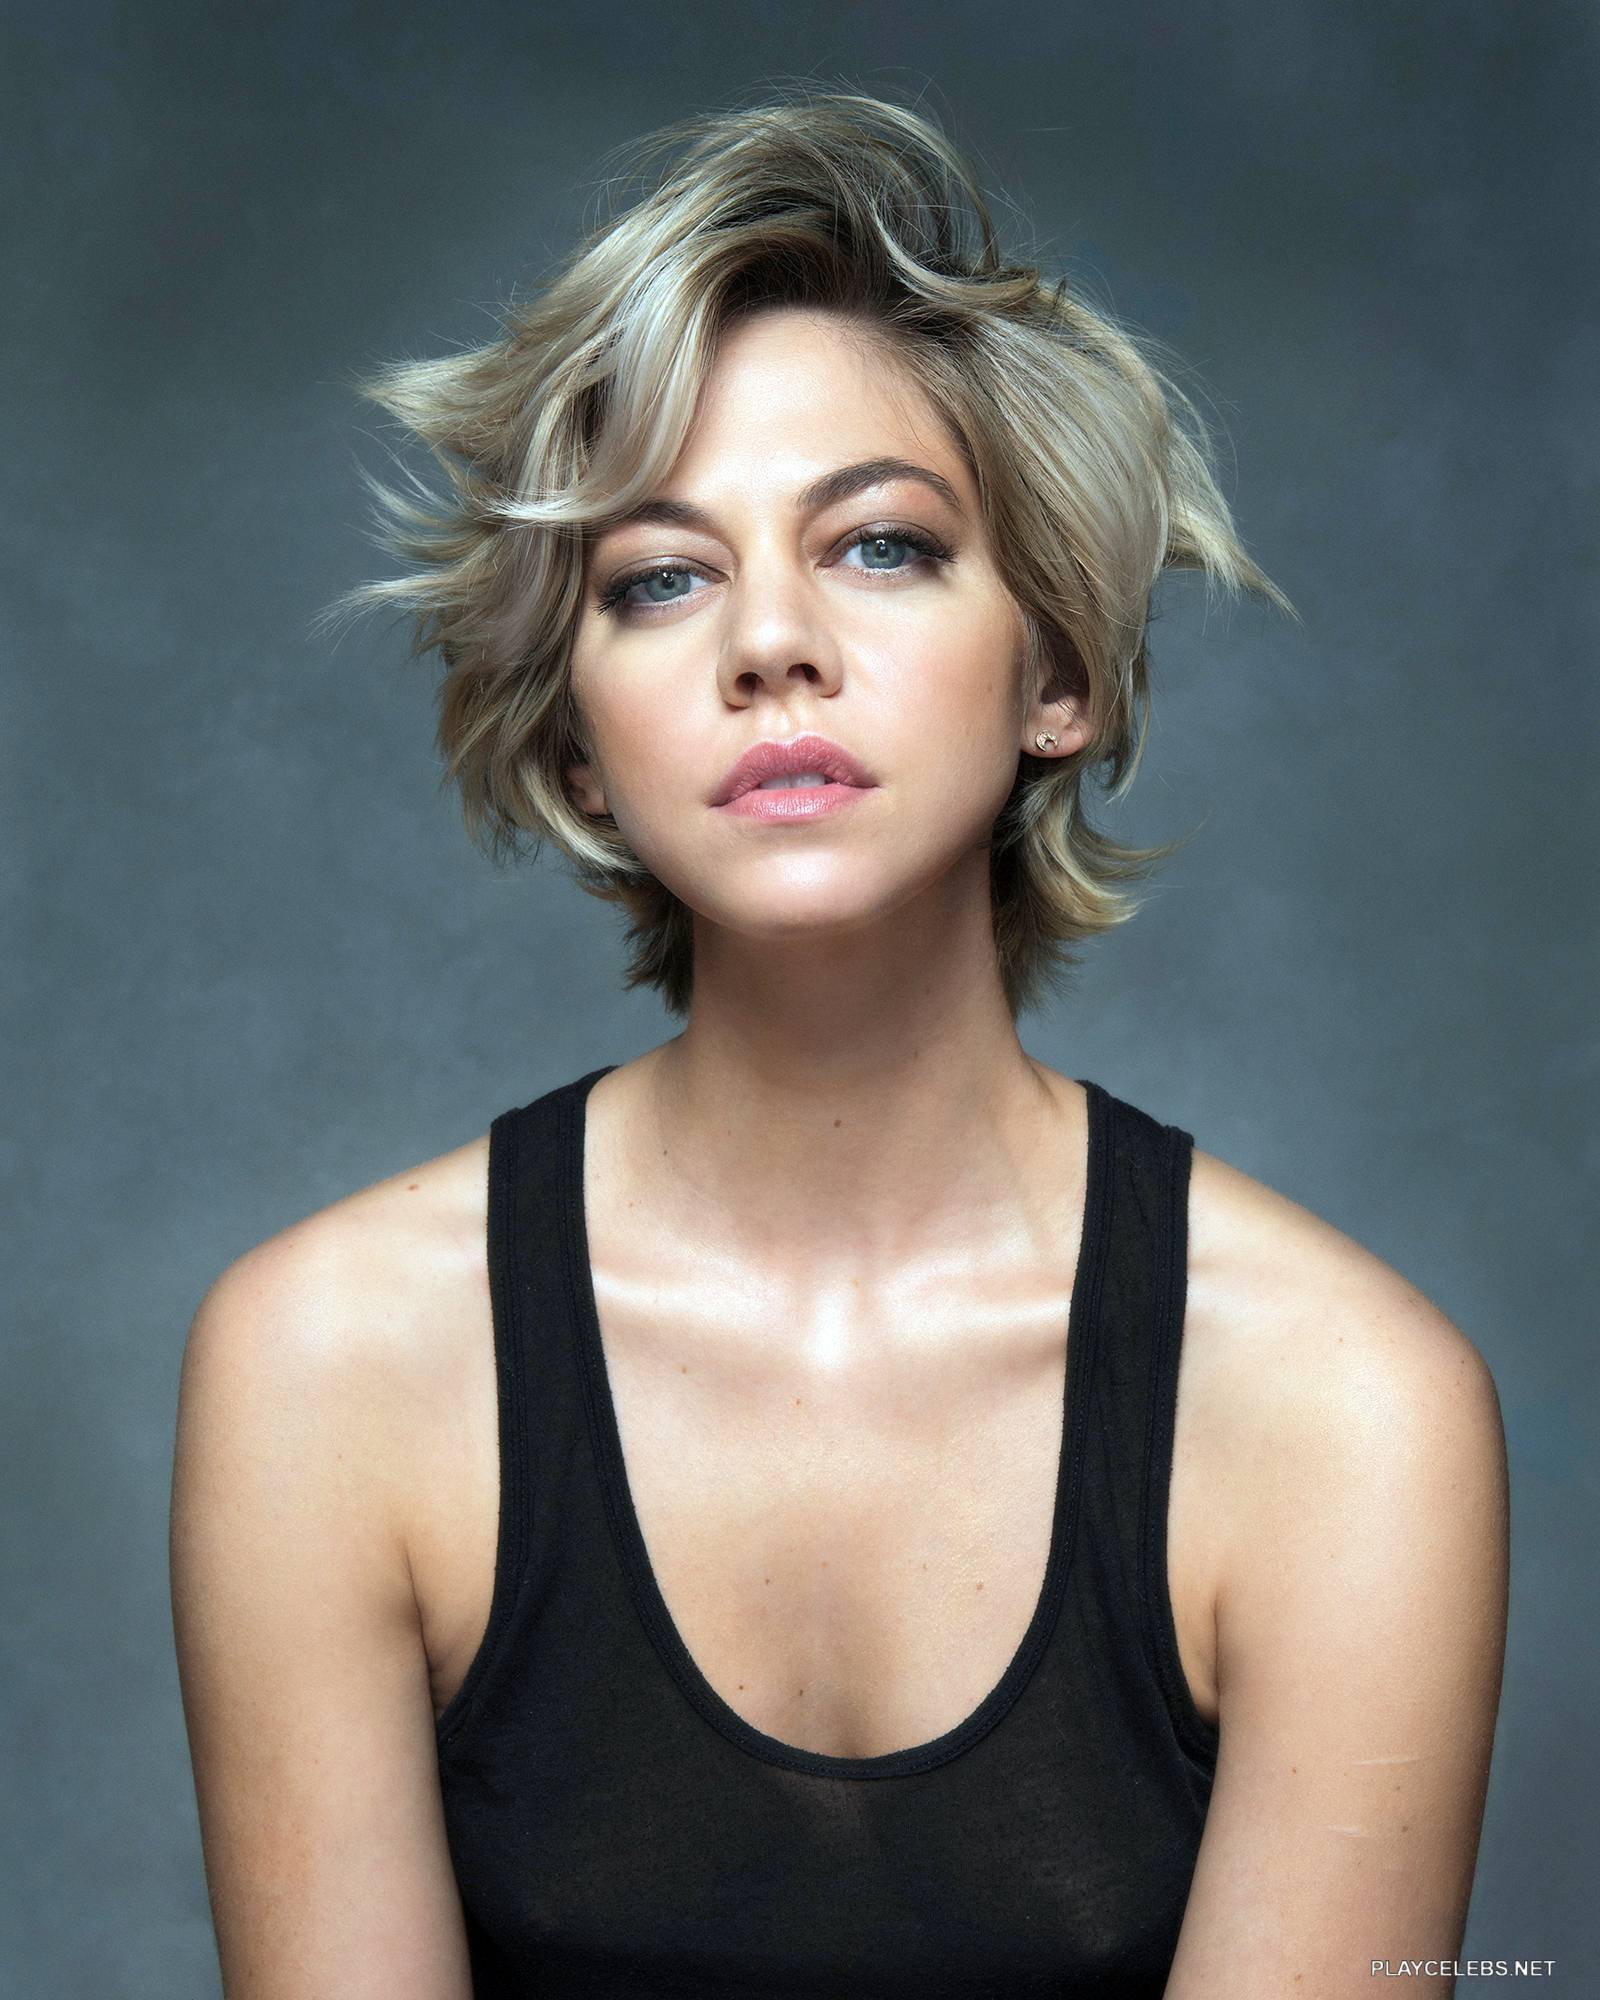 Analeigh Tipton Nude And Lesbian Sex Scenes image